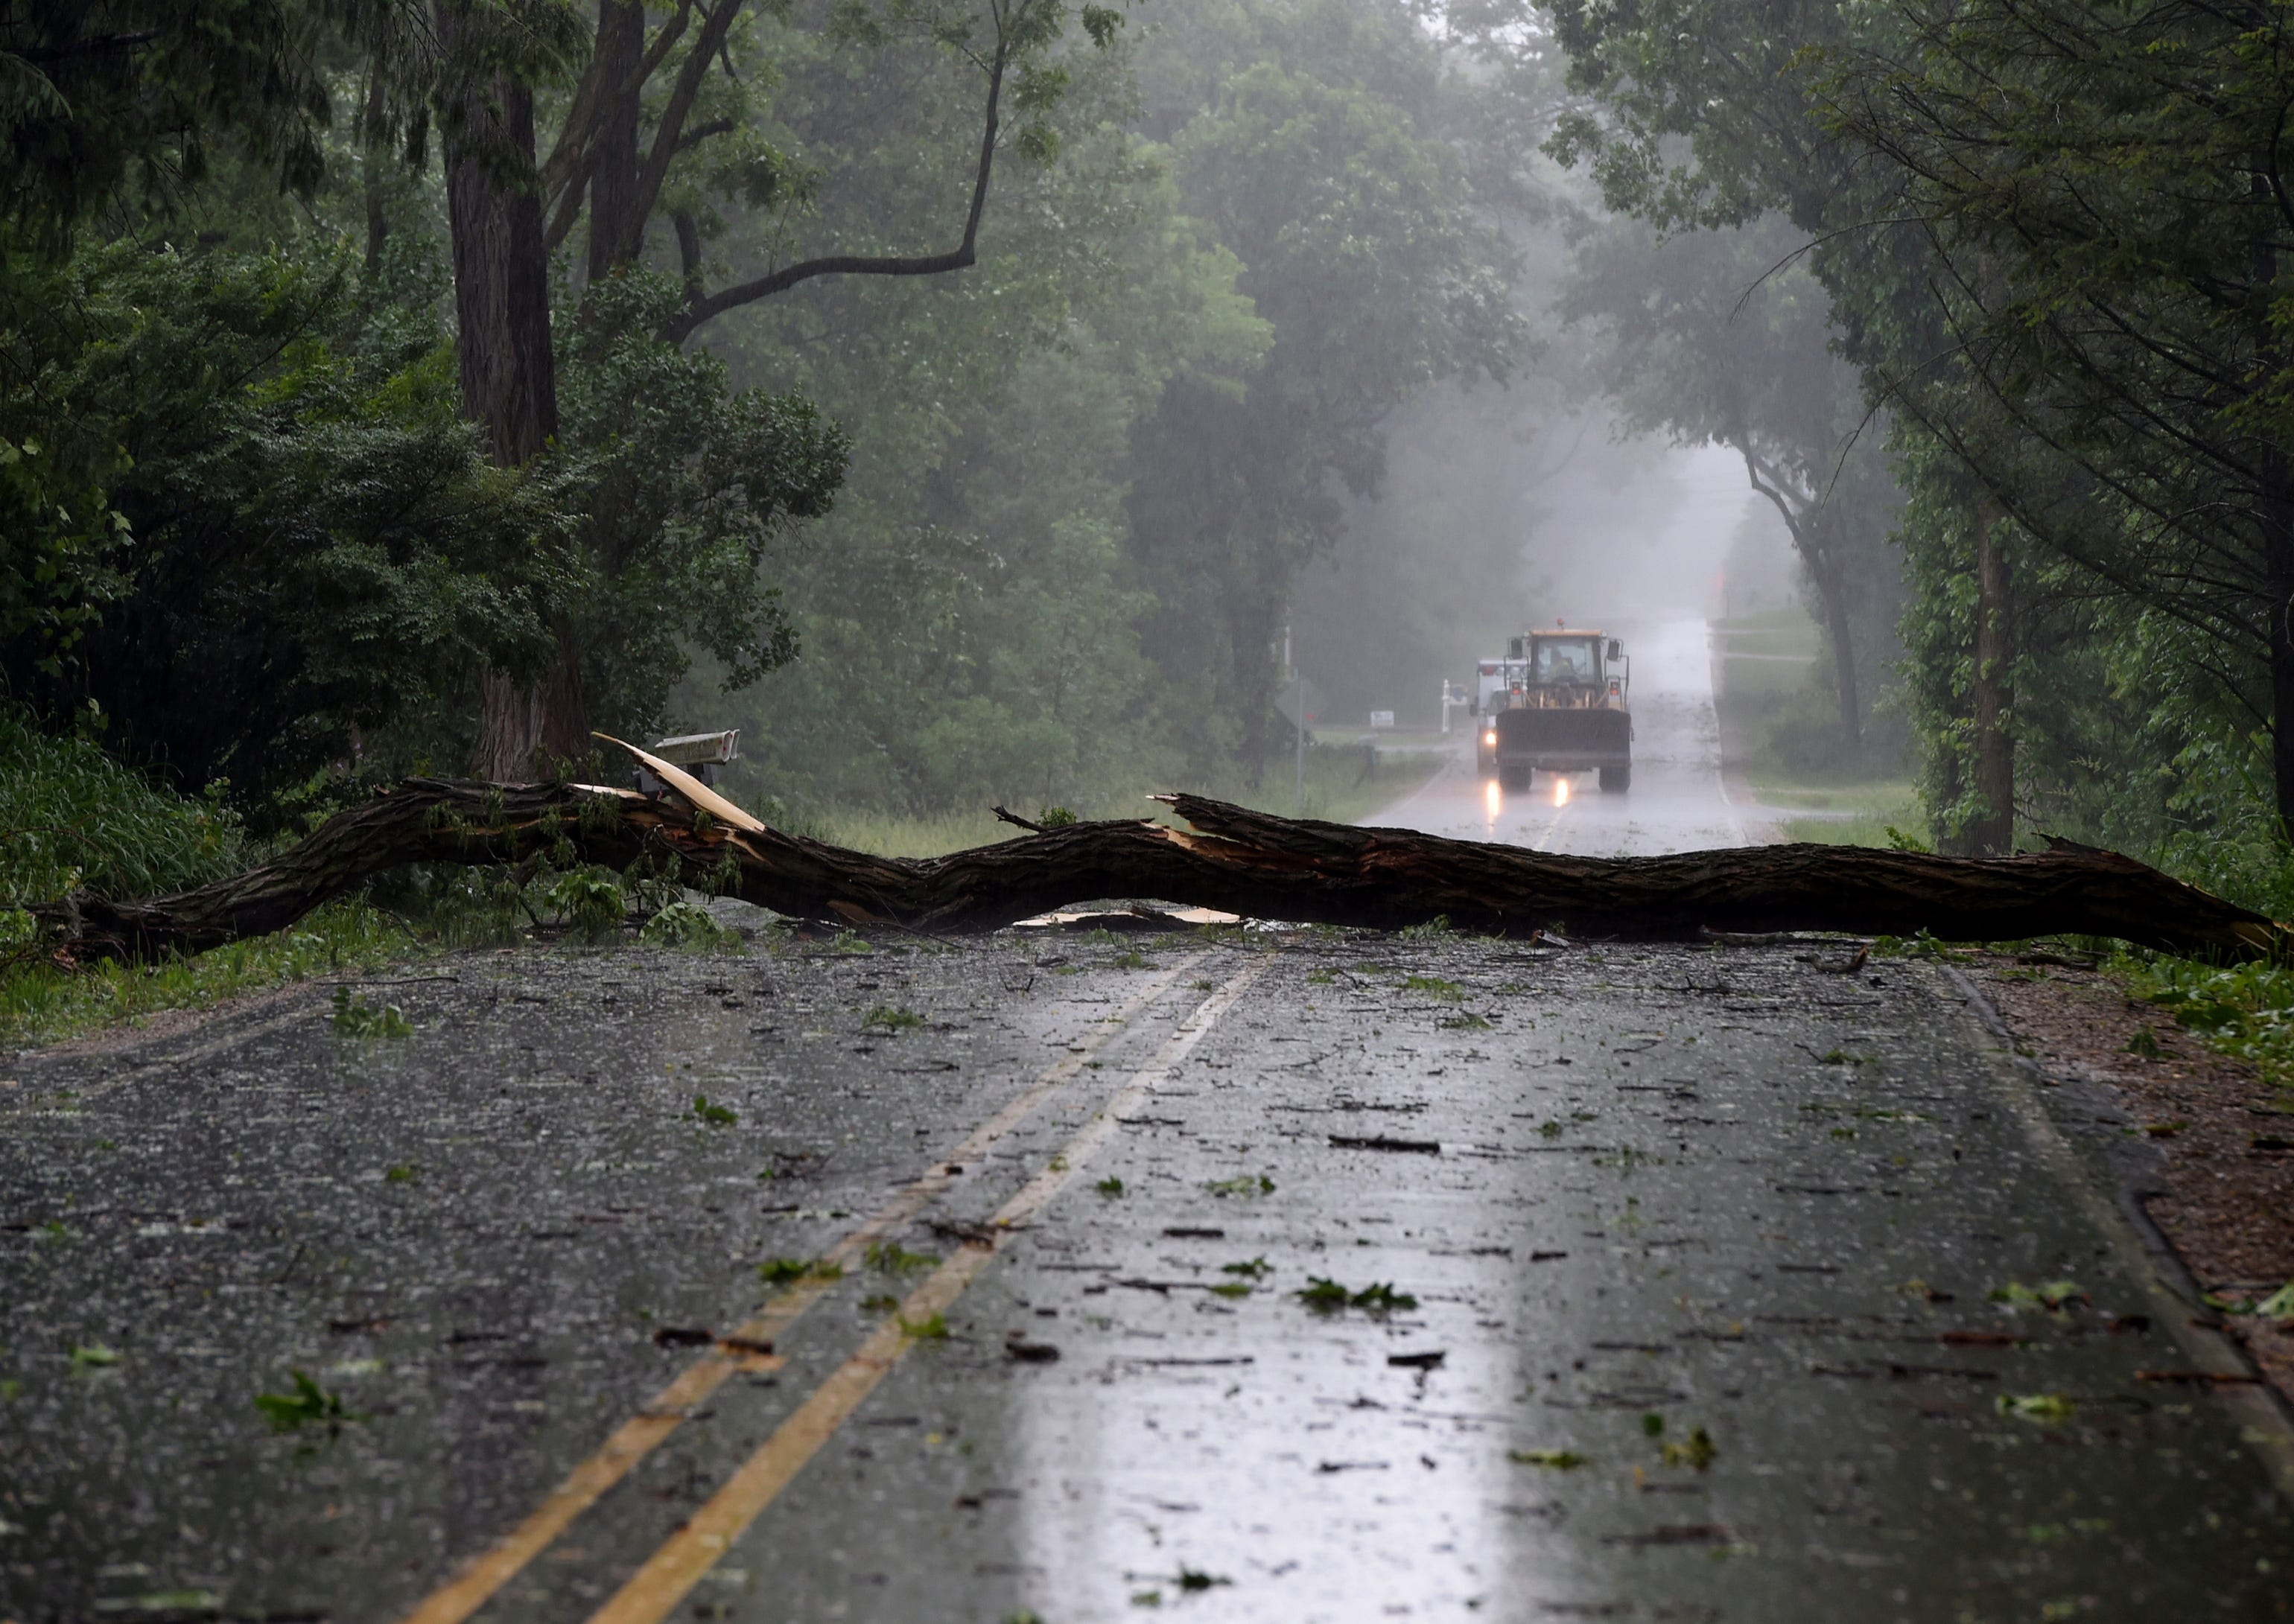 Storm damage is seen on Sandstone Road near McCain Road on Wednesday, June 10, 2020. Strong storms with heavy winds swept across Jackson County, Mich., causing power outages, downing trees and damaging property.